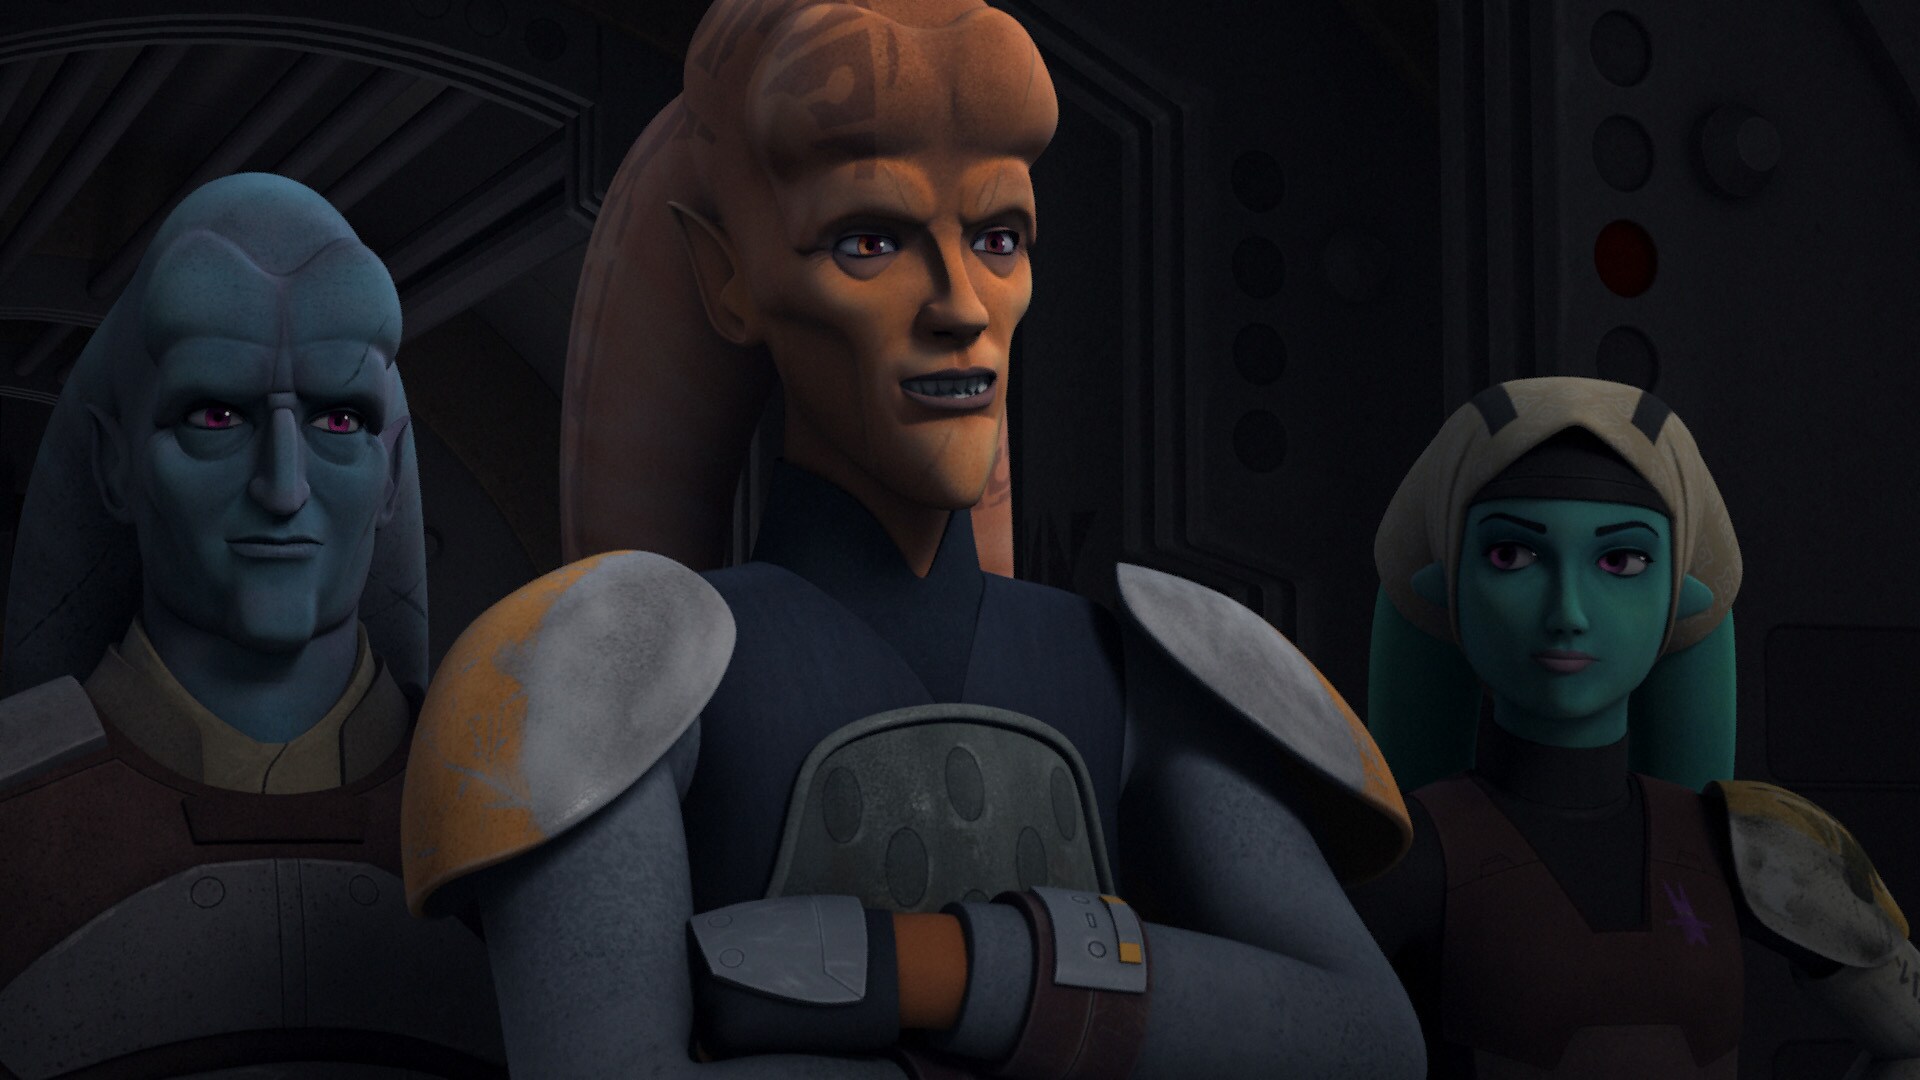 Cham Syndulla, Hera's father and Clone Wars legend, arrives to meet the rebels. Kanan is particul...